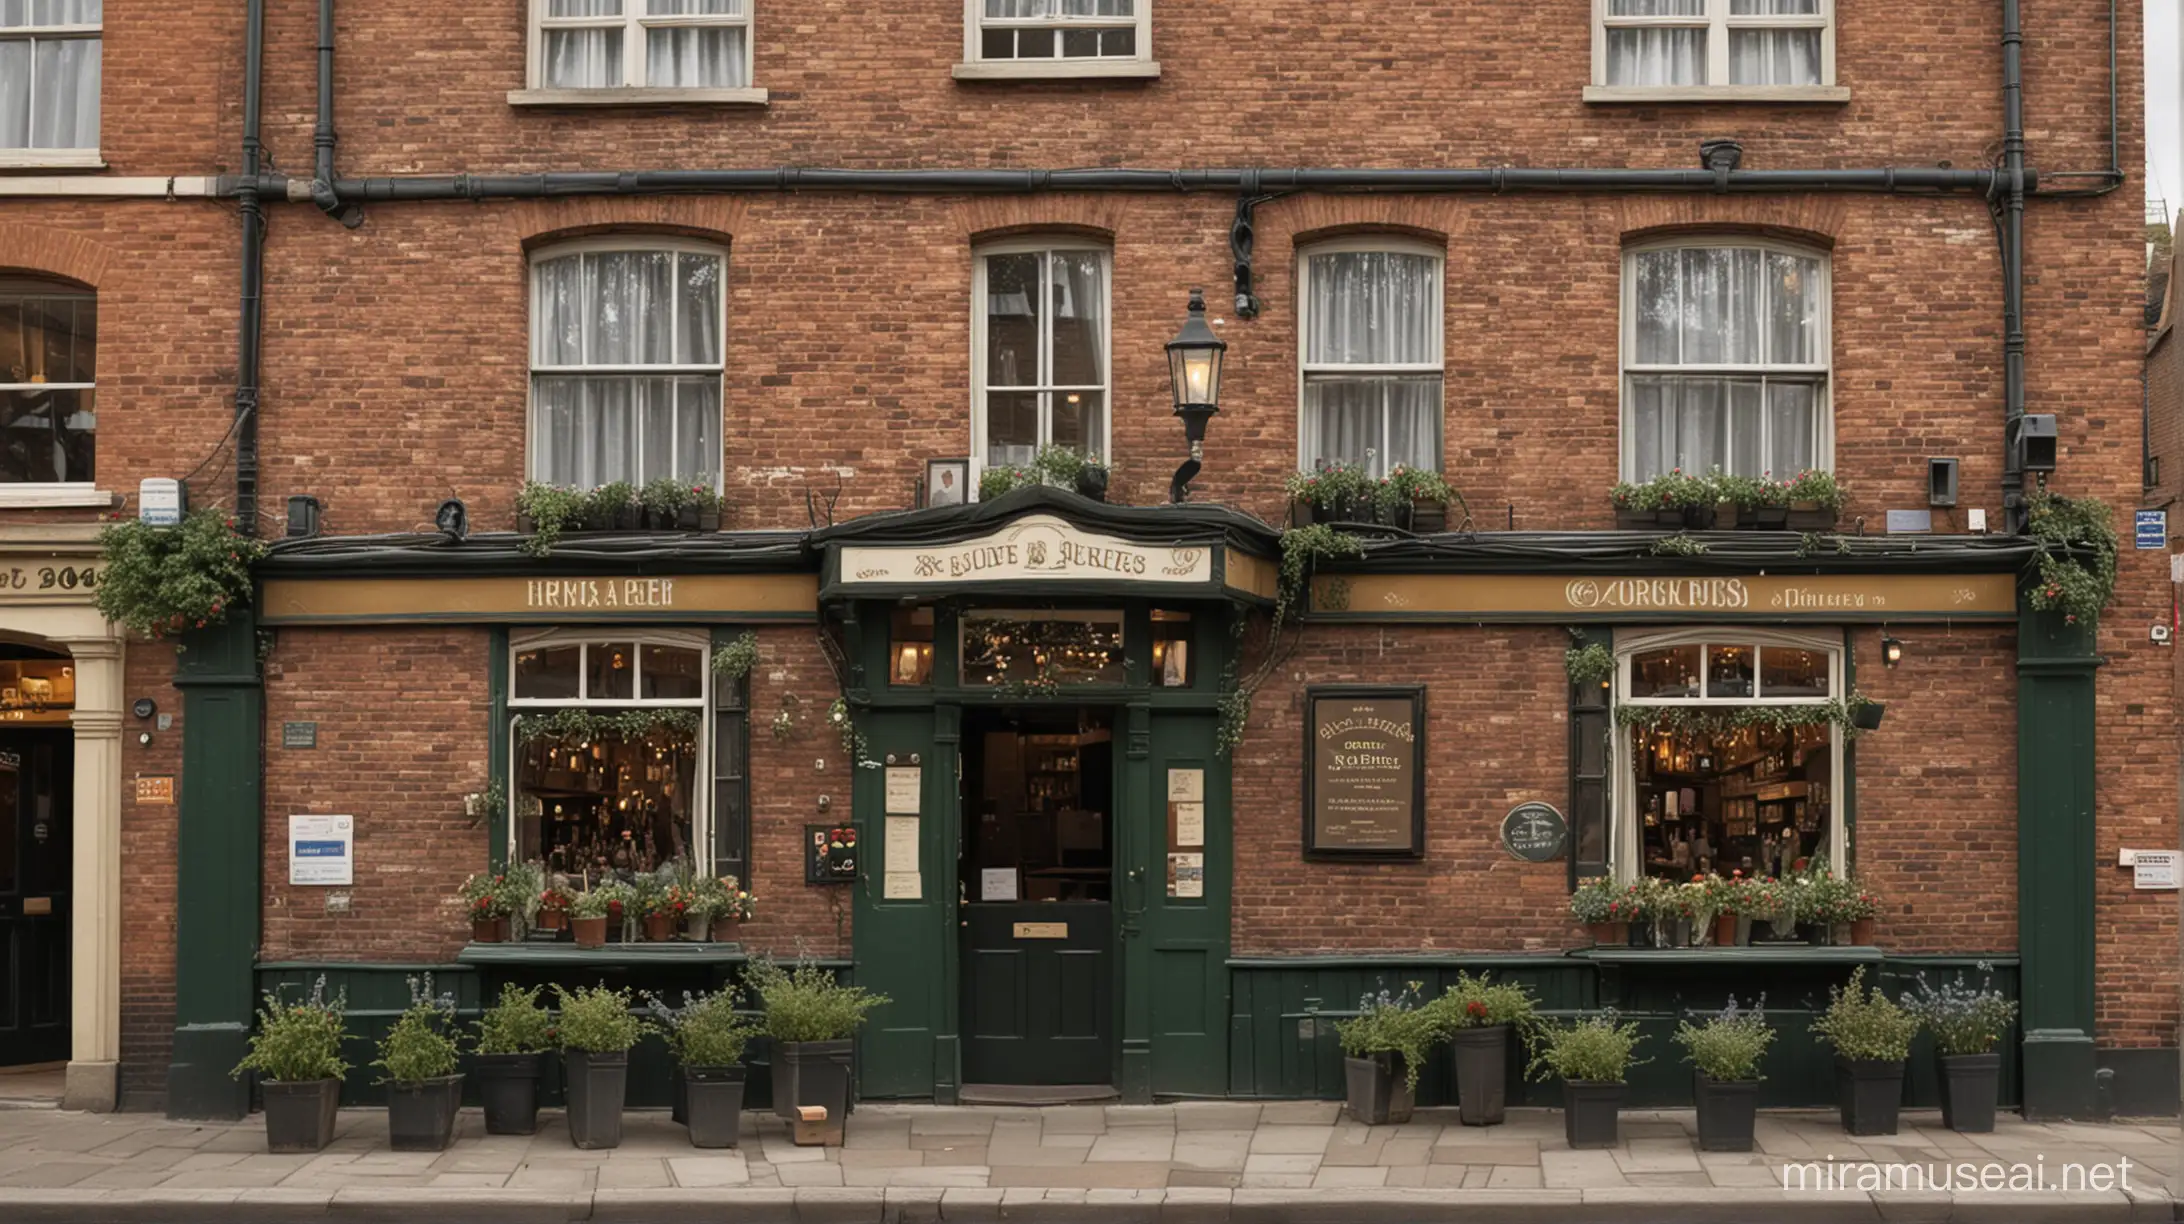 show me a realistic front of a British Pub that looks like a time capsule of 2006